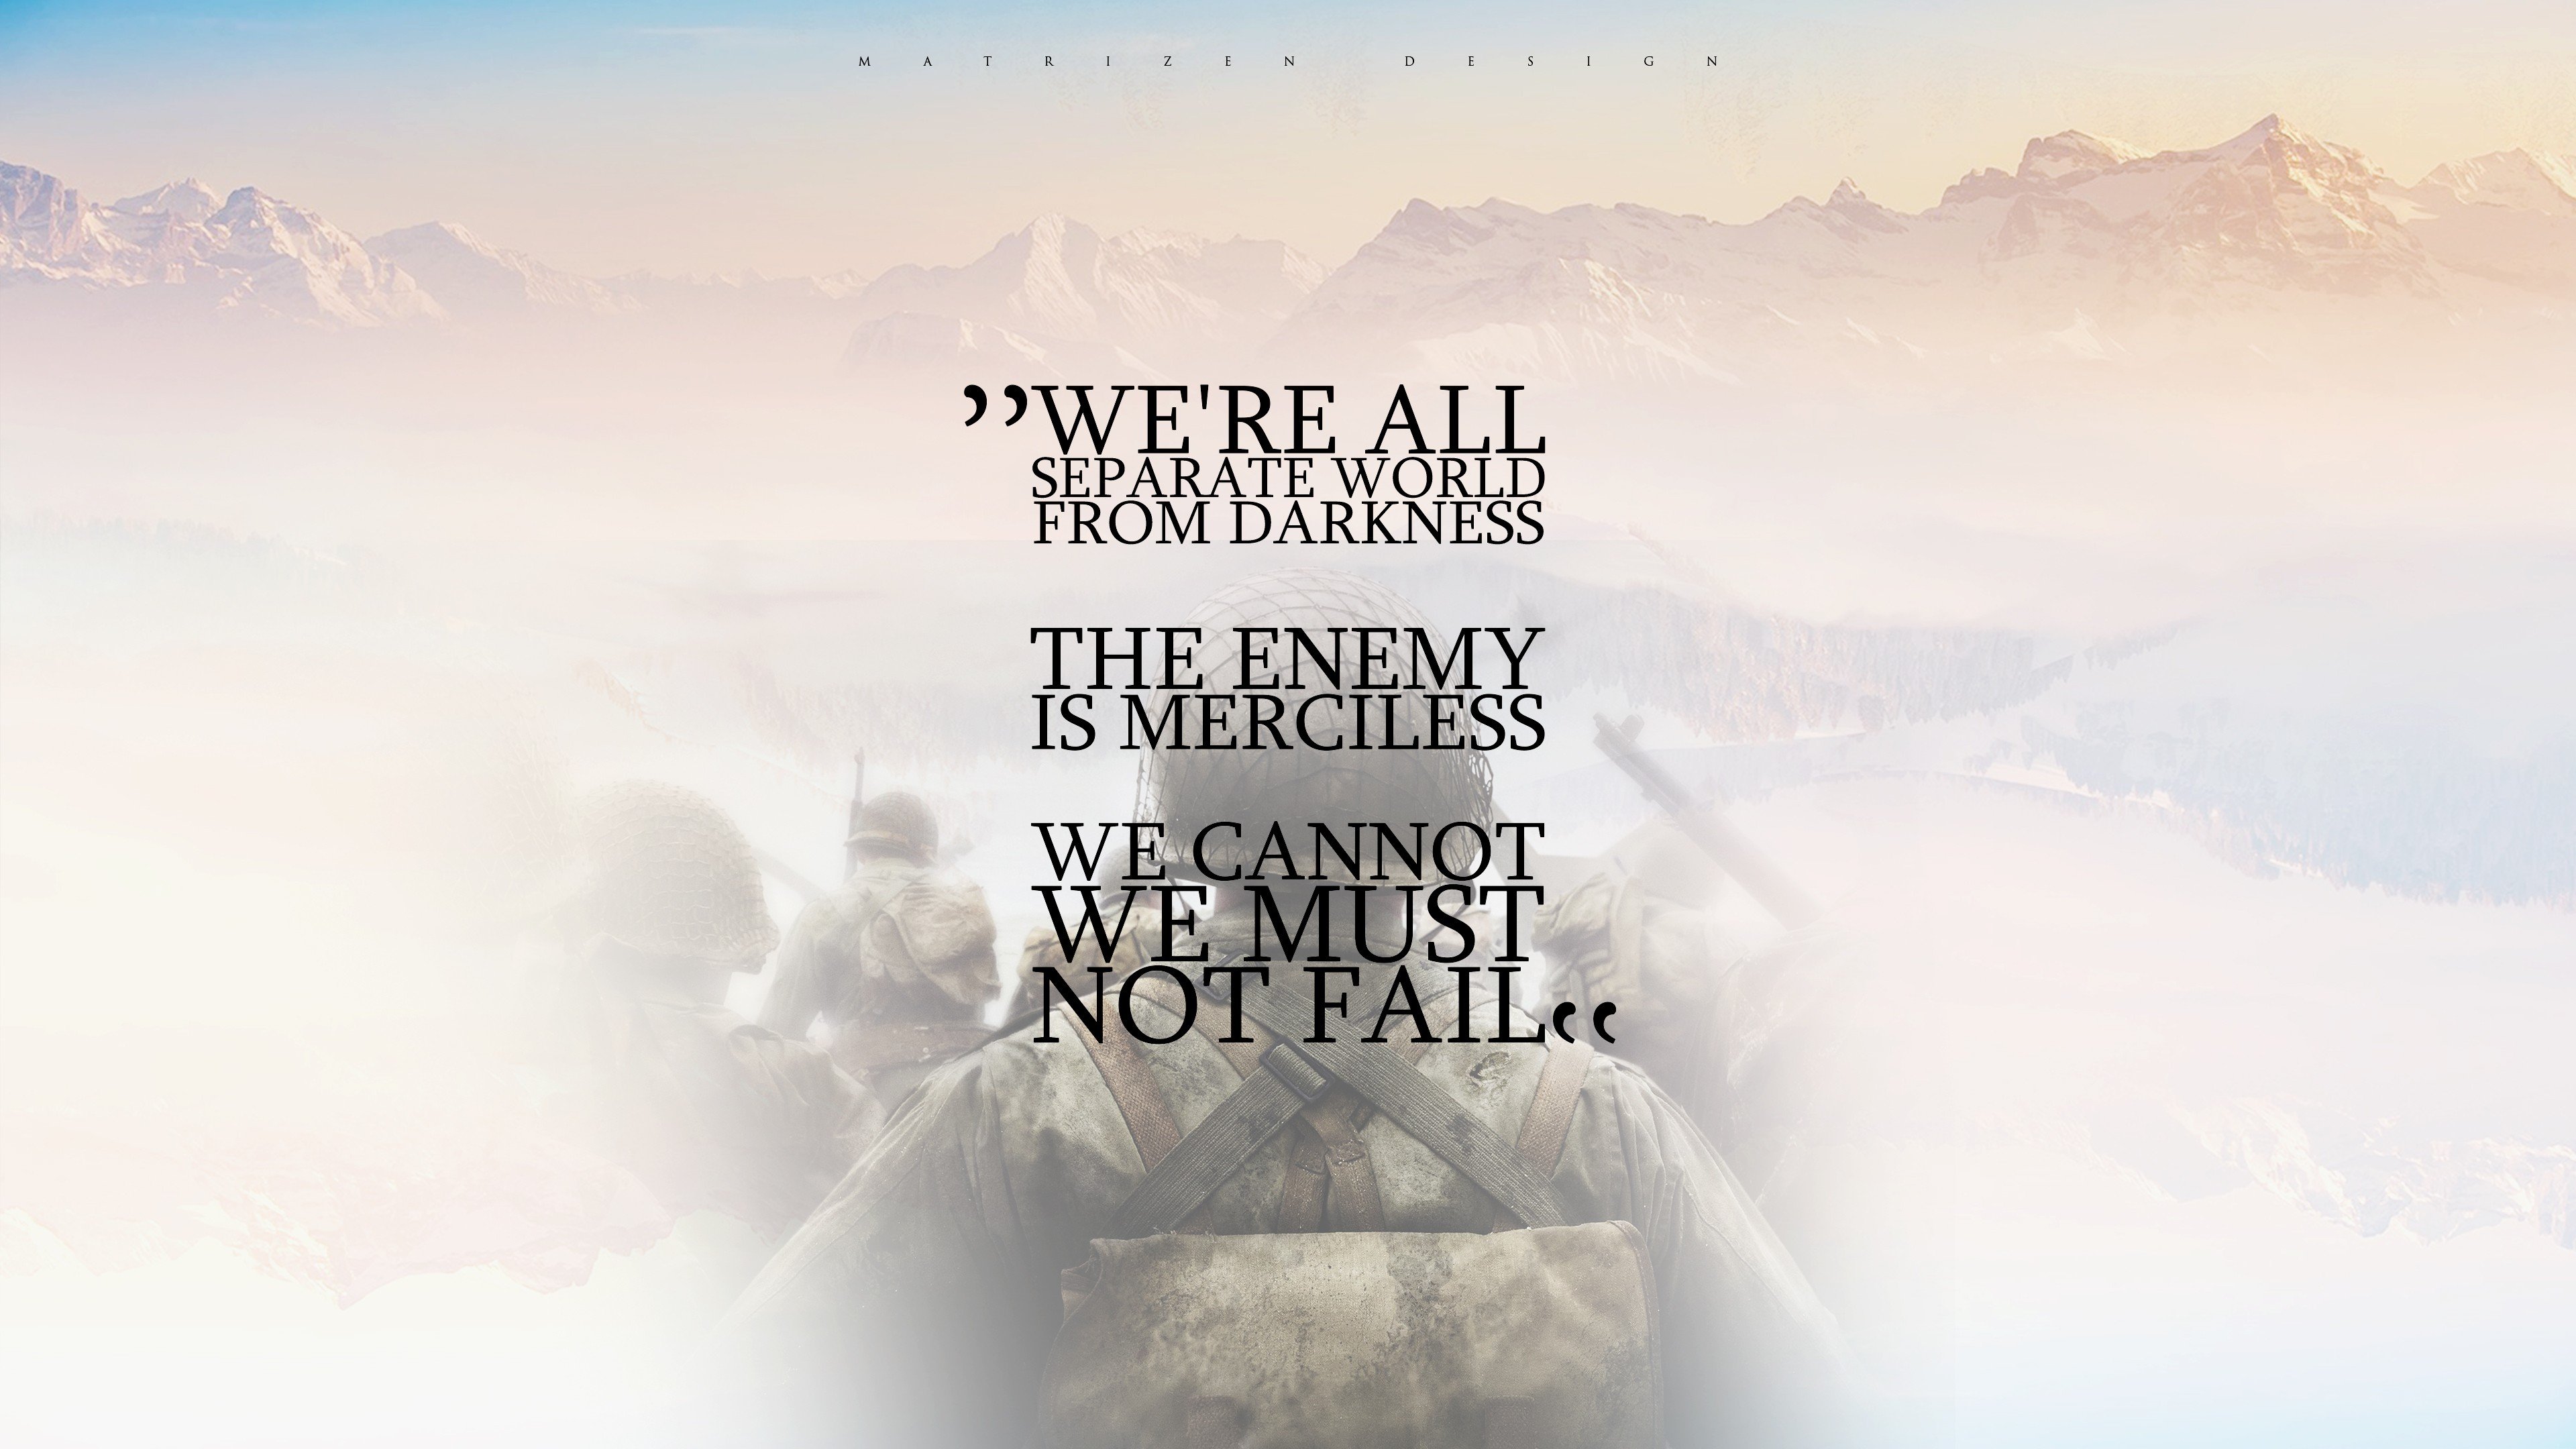 soldier, Matrizen Design, Typographic, Typography, Text, Quote, Video games, Call of Duty: WWII, First person shooter, Company, Mountains, Landscape, Digital art, 2D, Minimalism, Photoshop Wallpaper